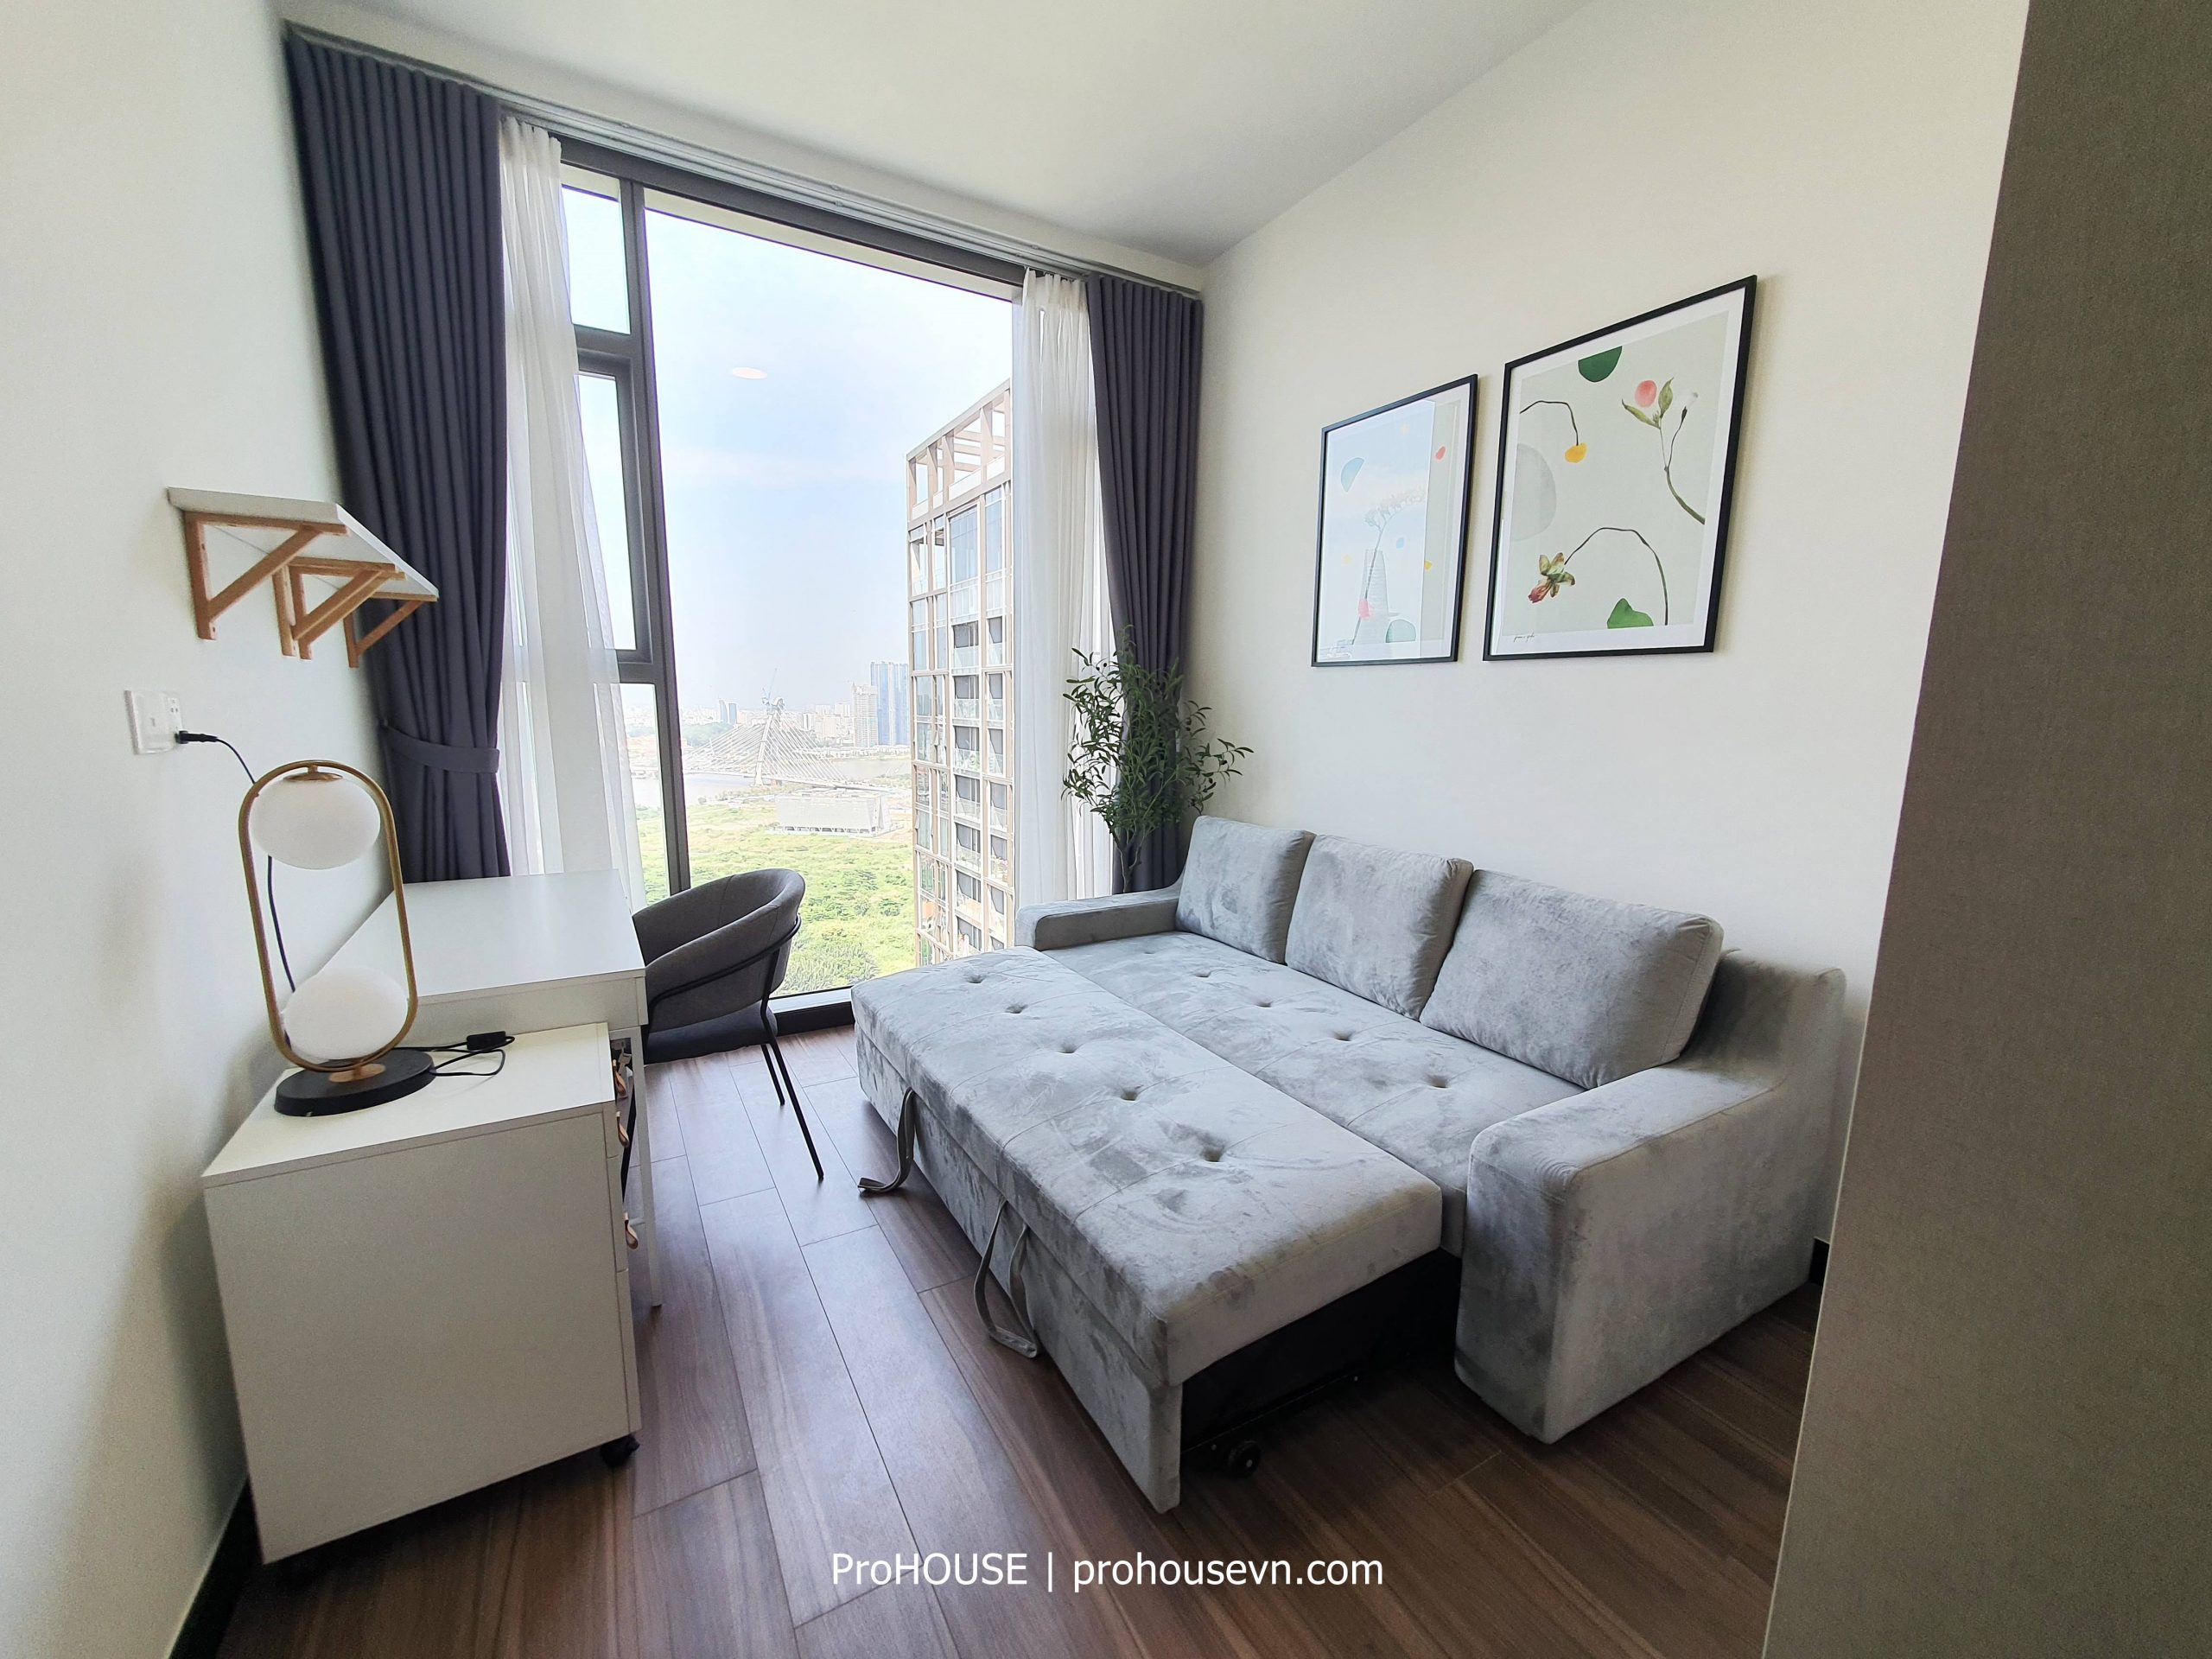 Extremely beautiful apartment in Empire City for rent with amazing view